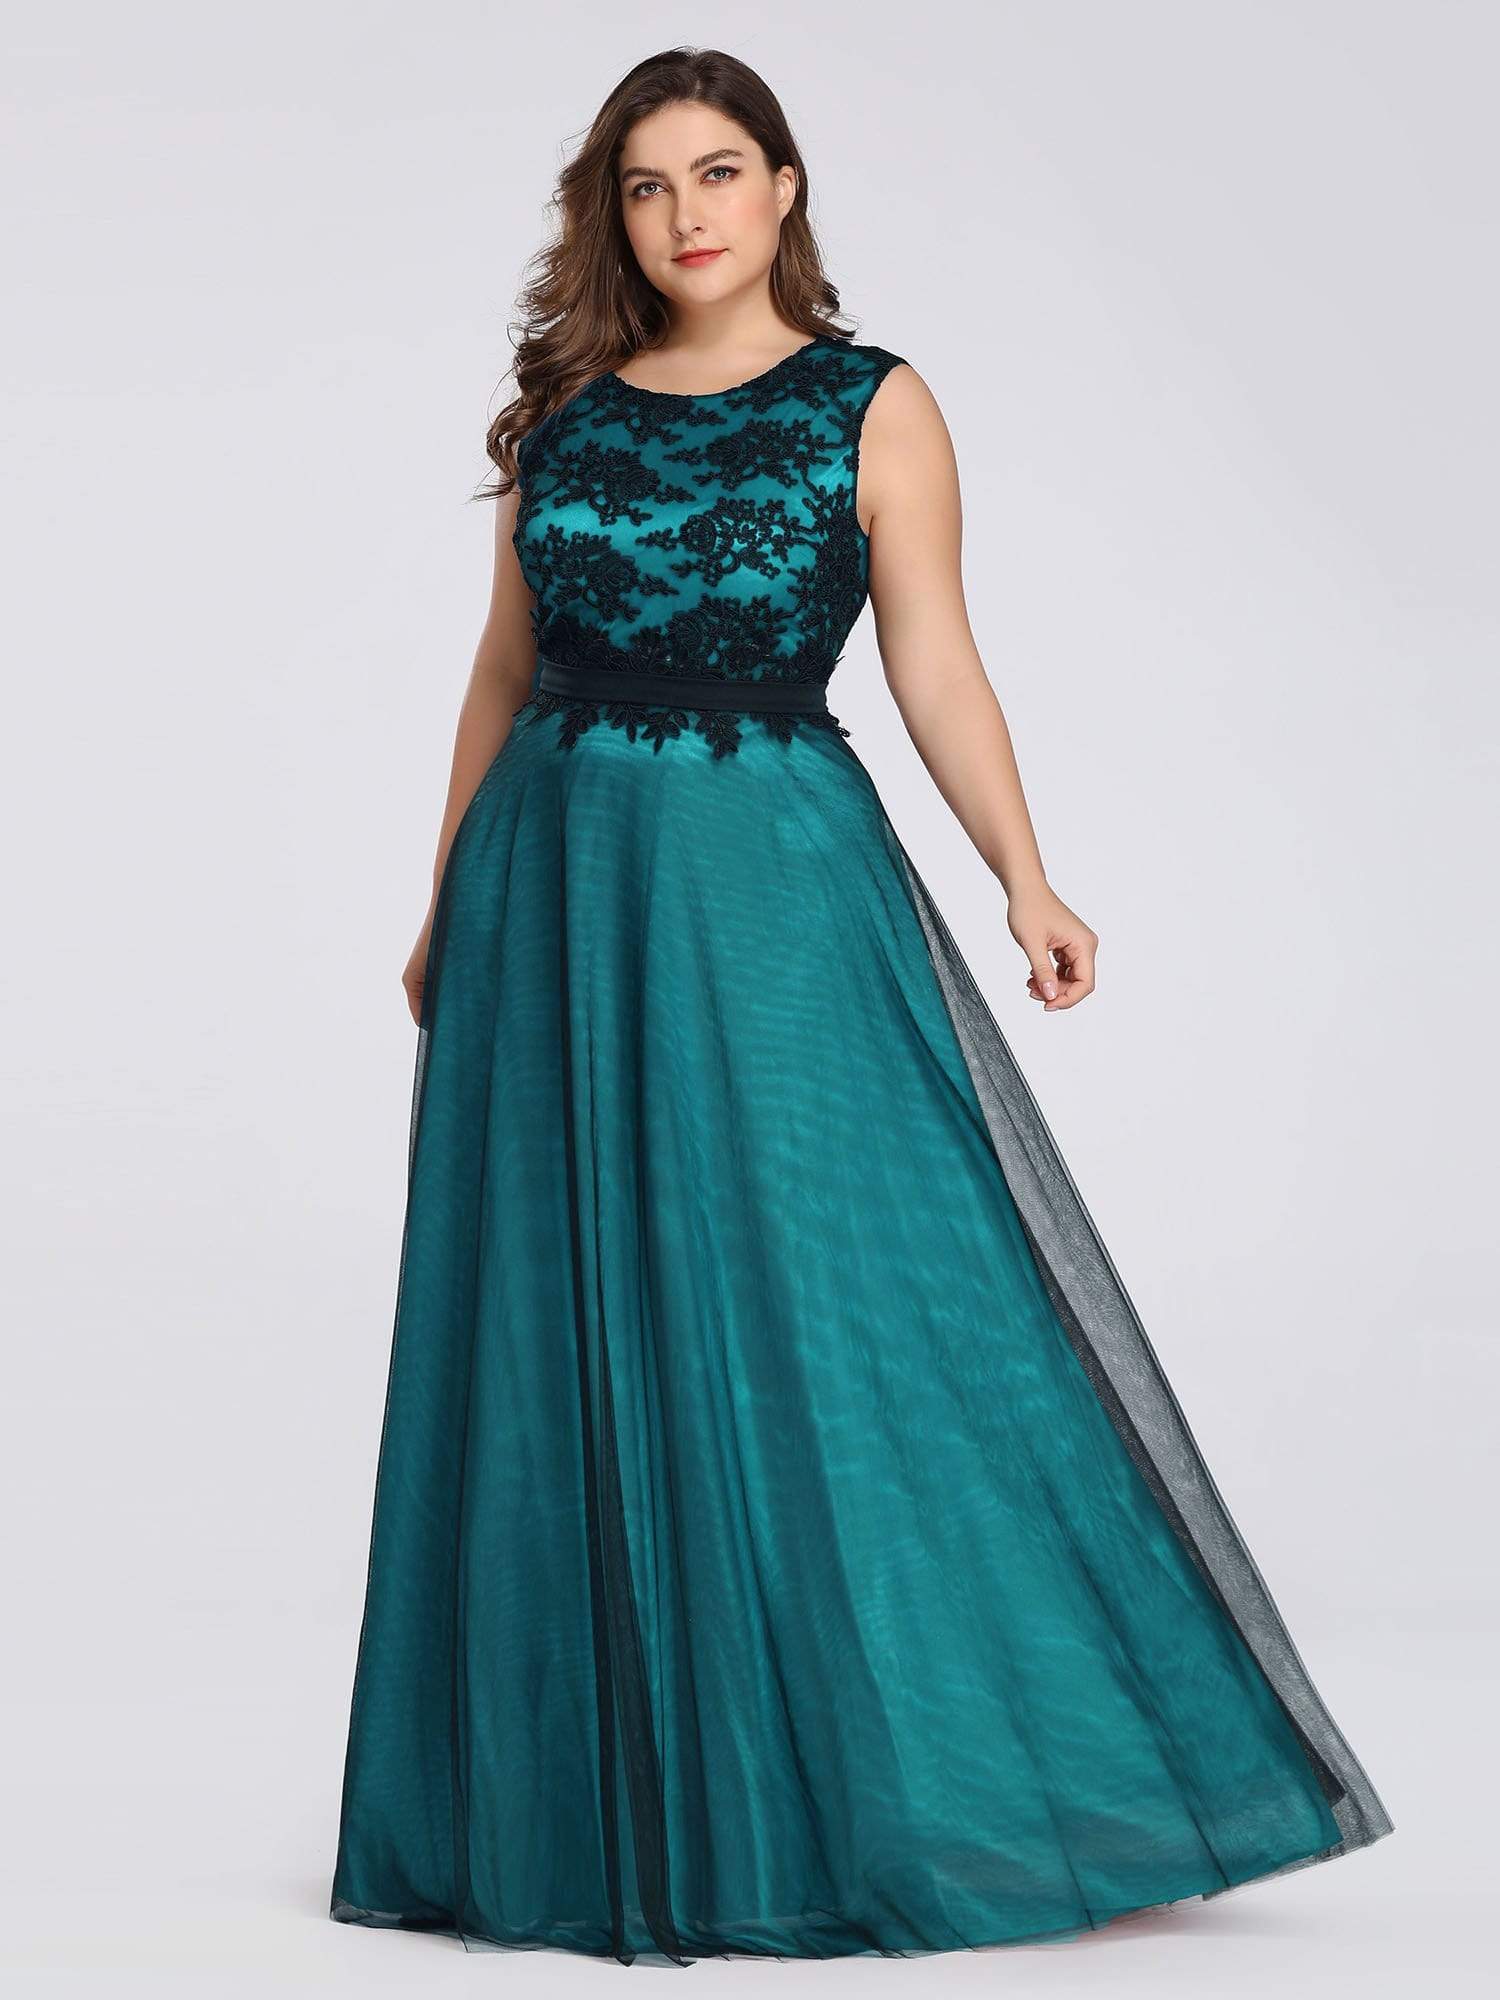 Floor Length Plus Size Lace Evening Dresses with Black Brocade